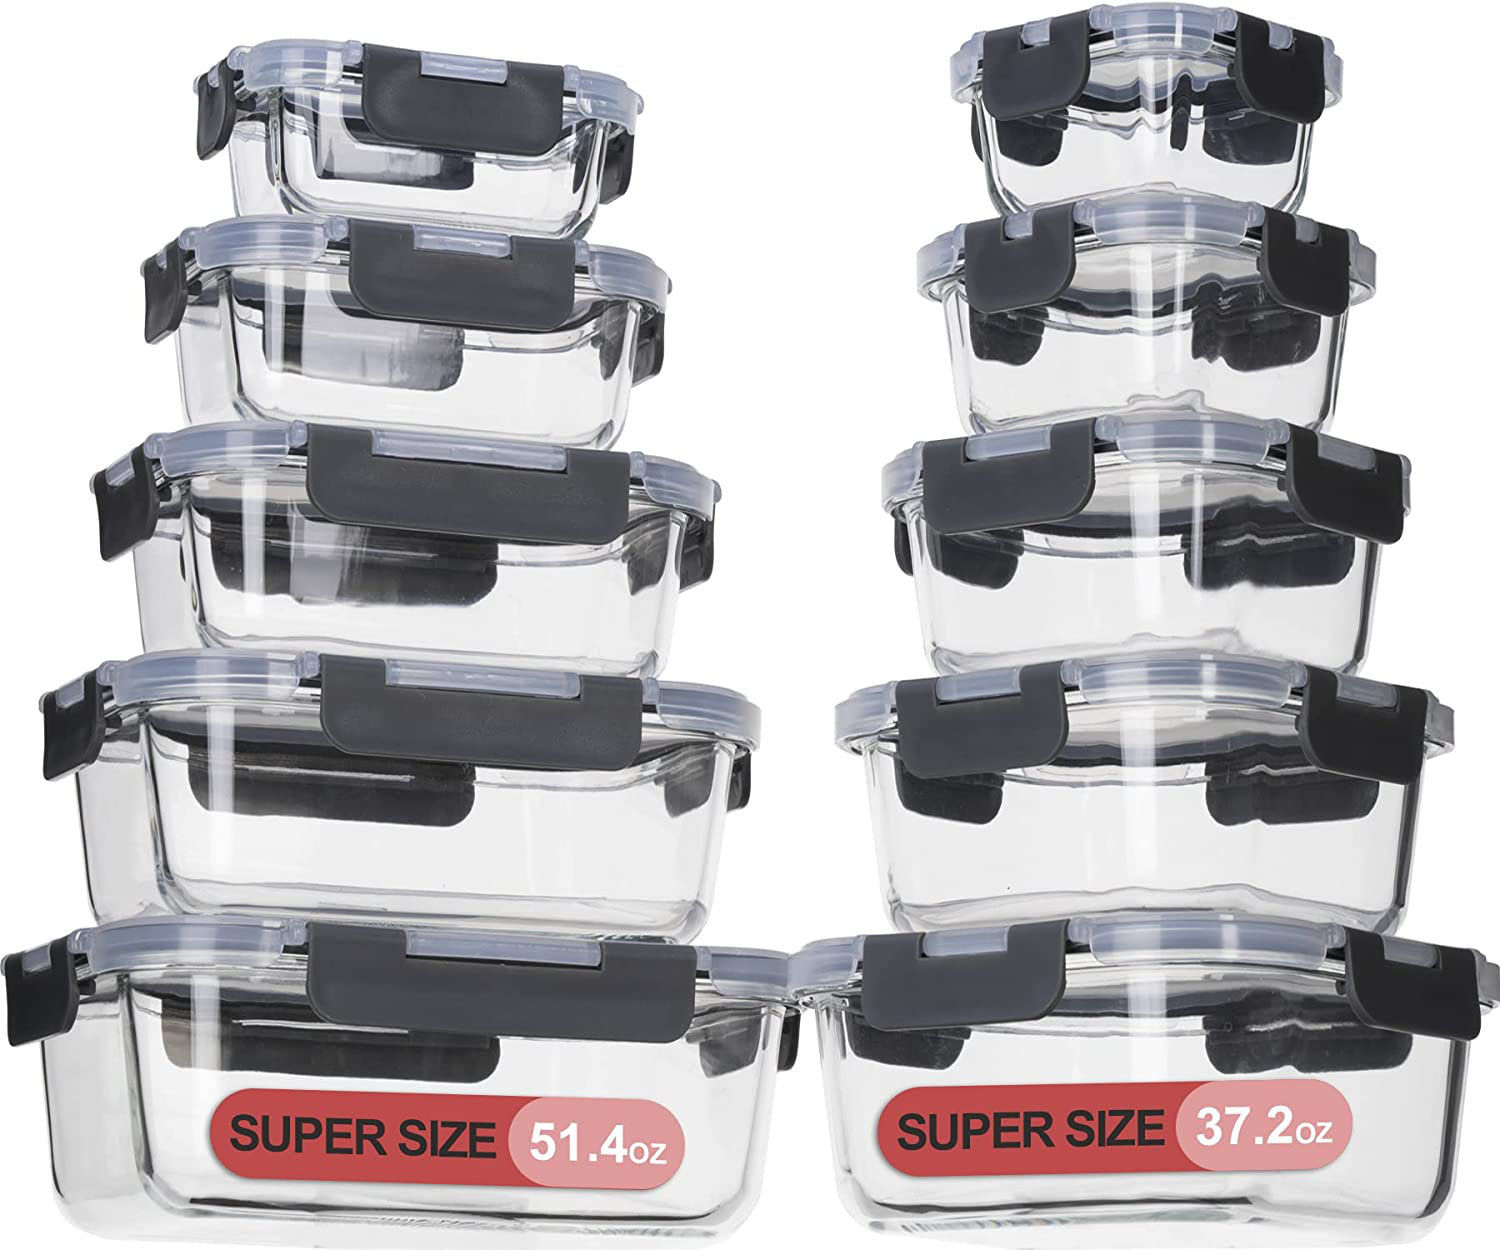  C CREST [10 Pack] Glass Meal Prep Containers, Food Storage  Containers with Lids Airtight, Glass Lunch Boxes, Microwave, Oven, Freezer  and Dishwasher Safe: Home & Kitchen